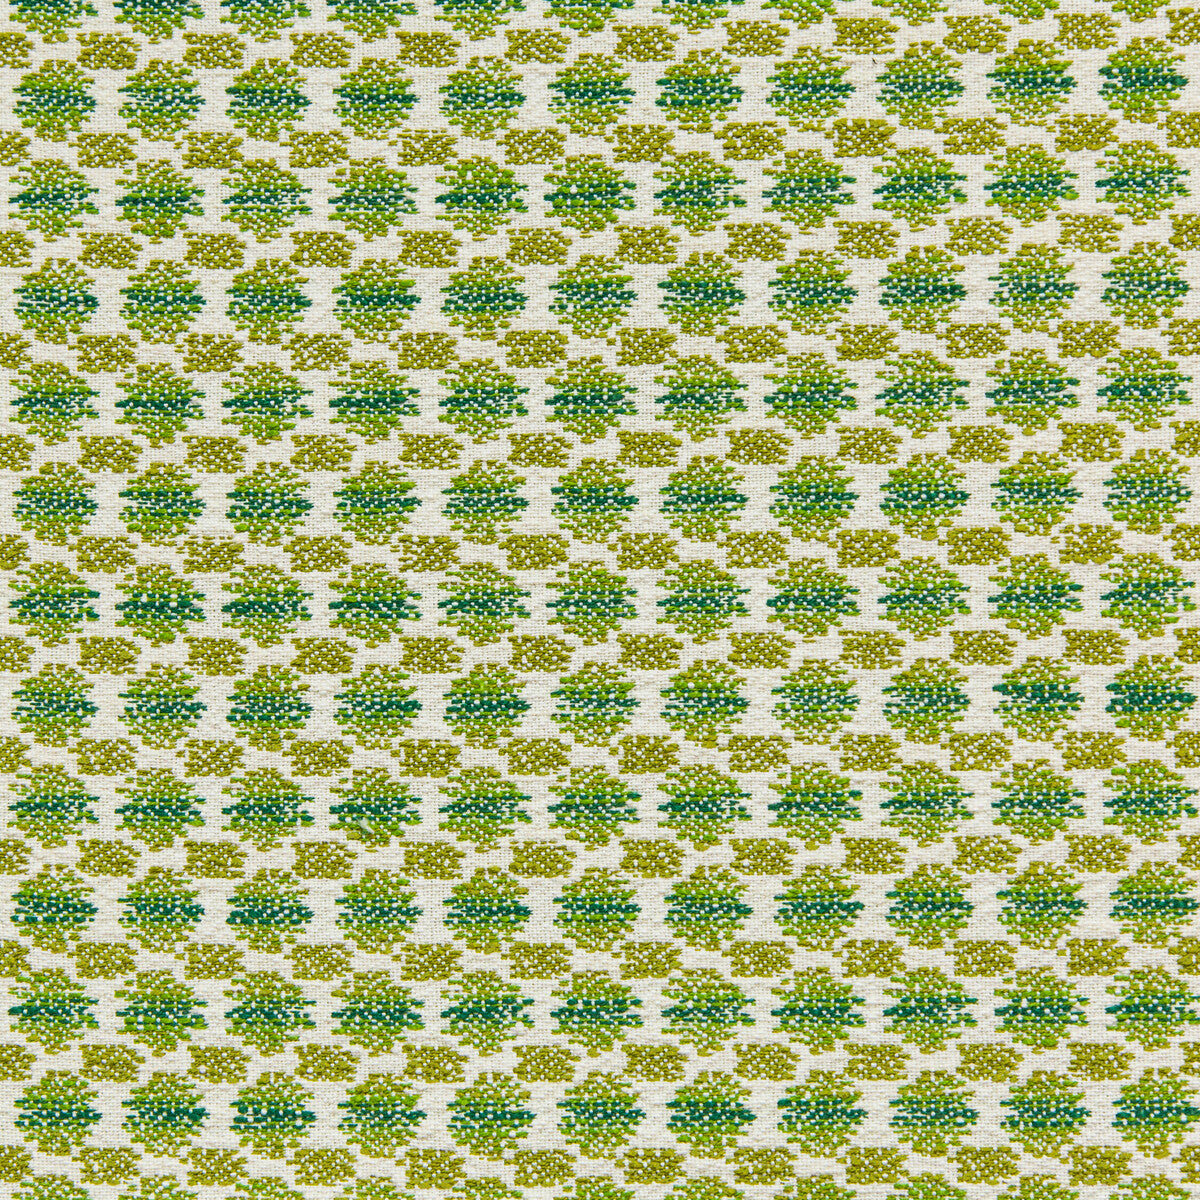 Lancing Weave fabric in kiwi color - pattern 2020100.3.0 - by Lee Jofa in the Linford Weaves collection